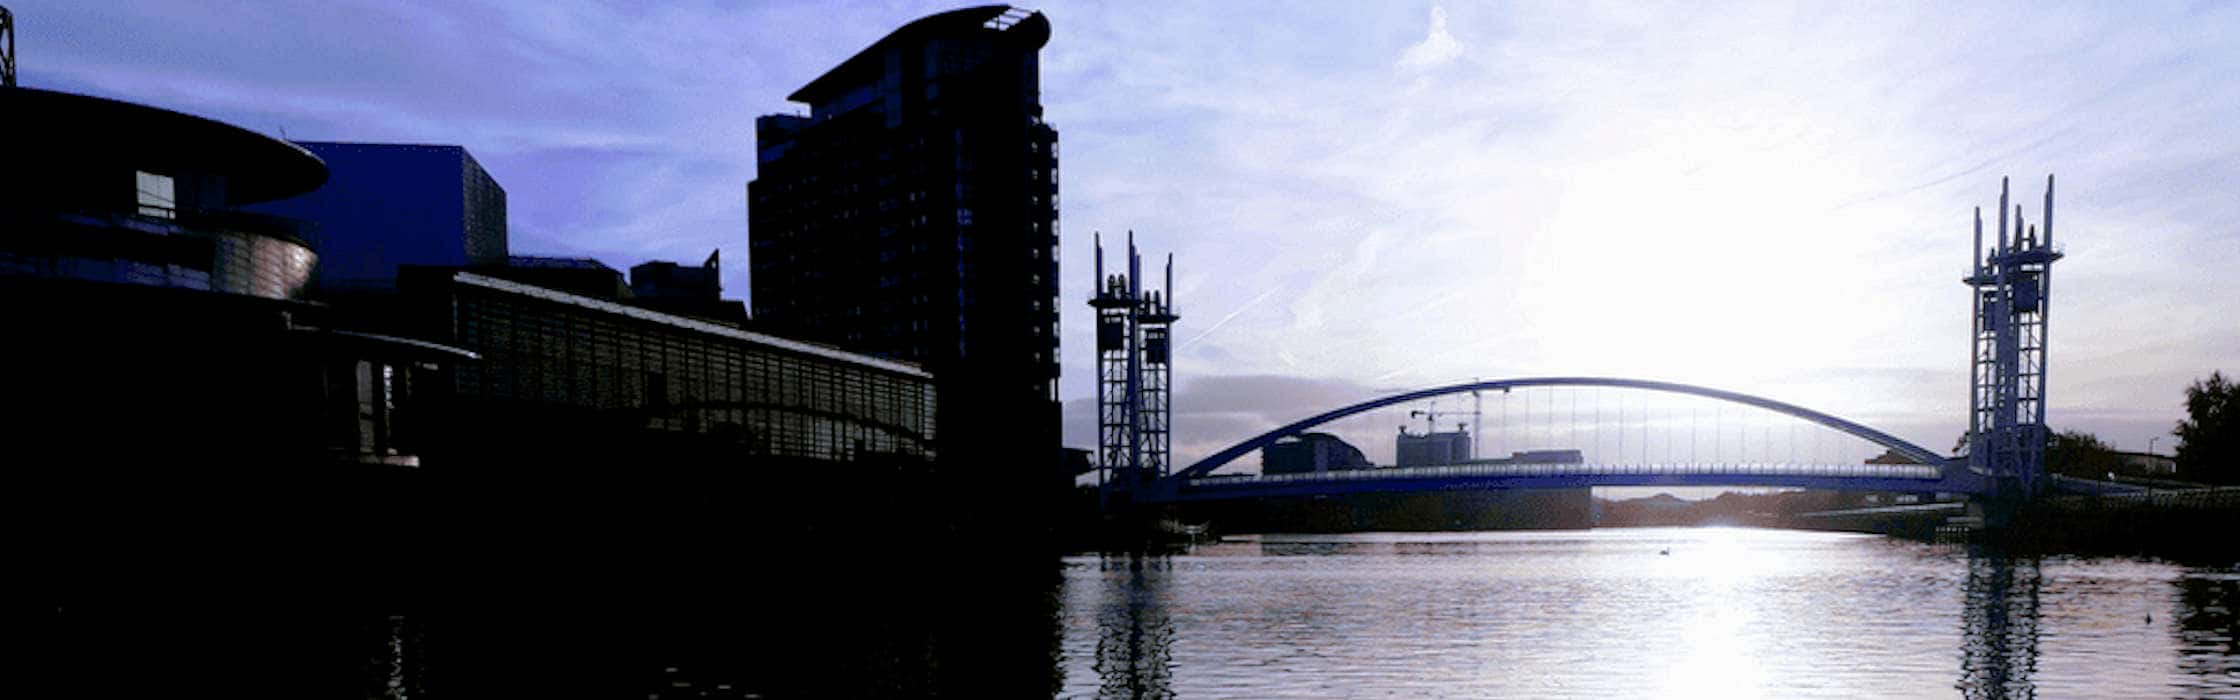 What's On at Manchester River Cruises, Salford